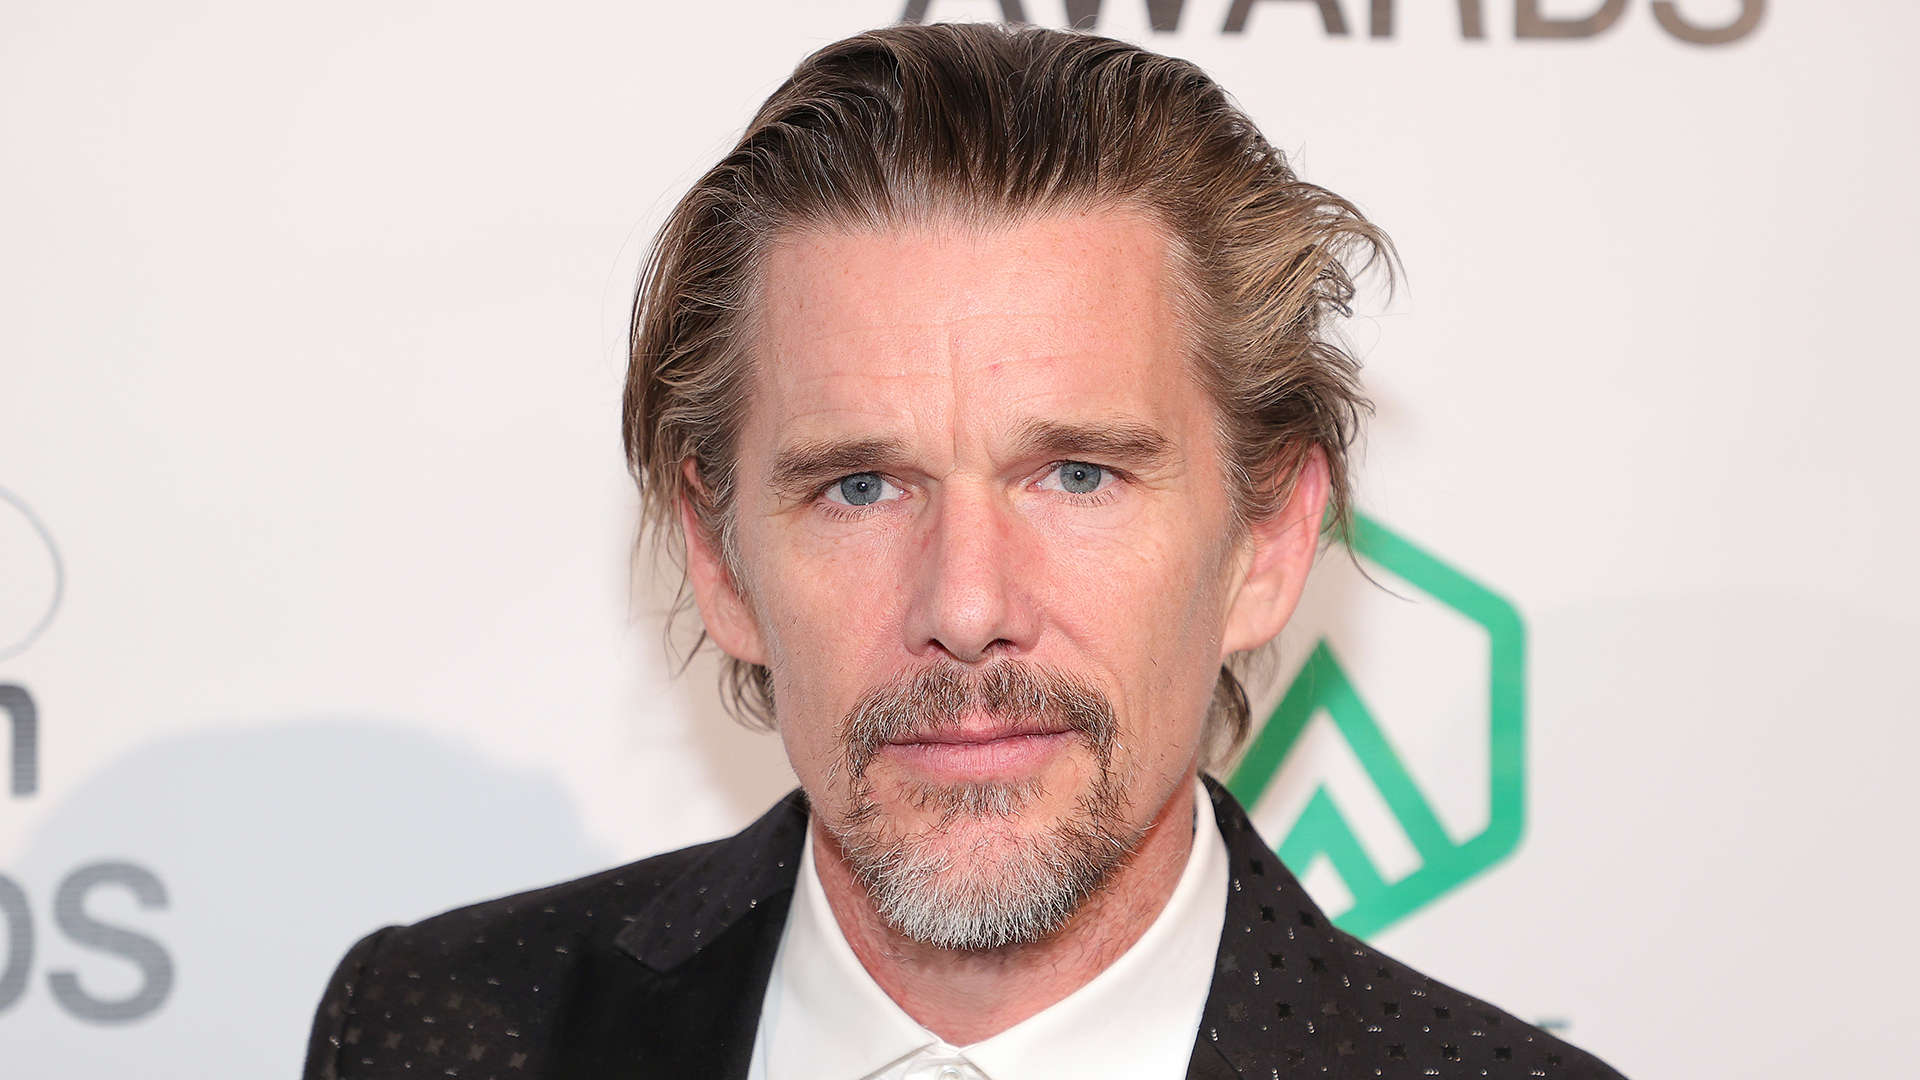 Casting News: Ethan Hawke Set to Star in Thriller Flick ‘Leave the World Behind’ 